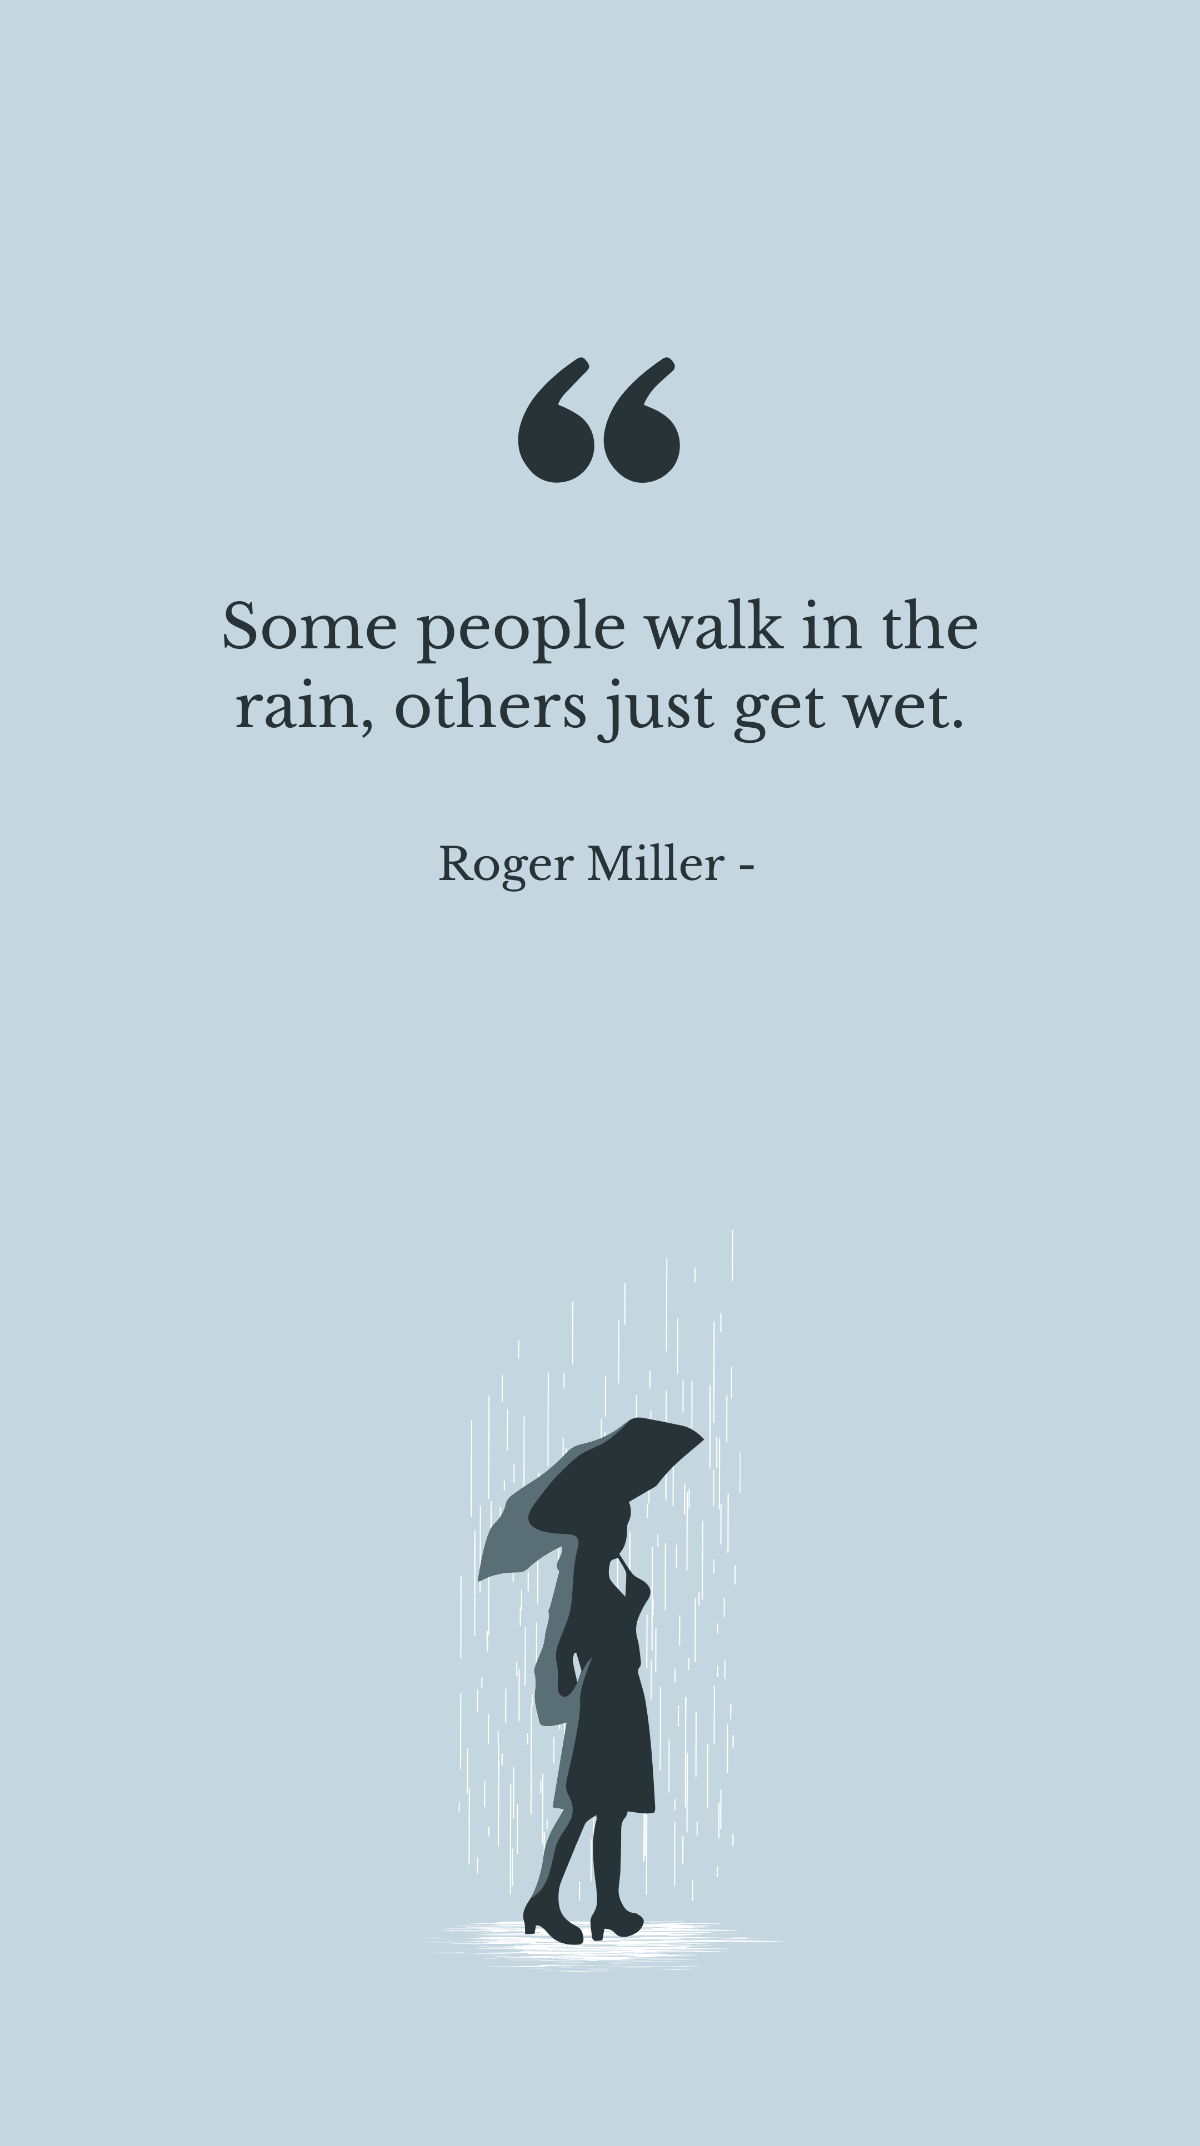 Roger Miller - Some people walk in the rain, others just get wet.